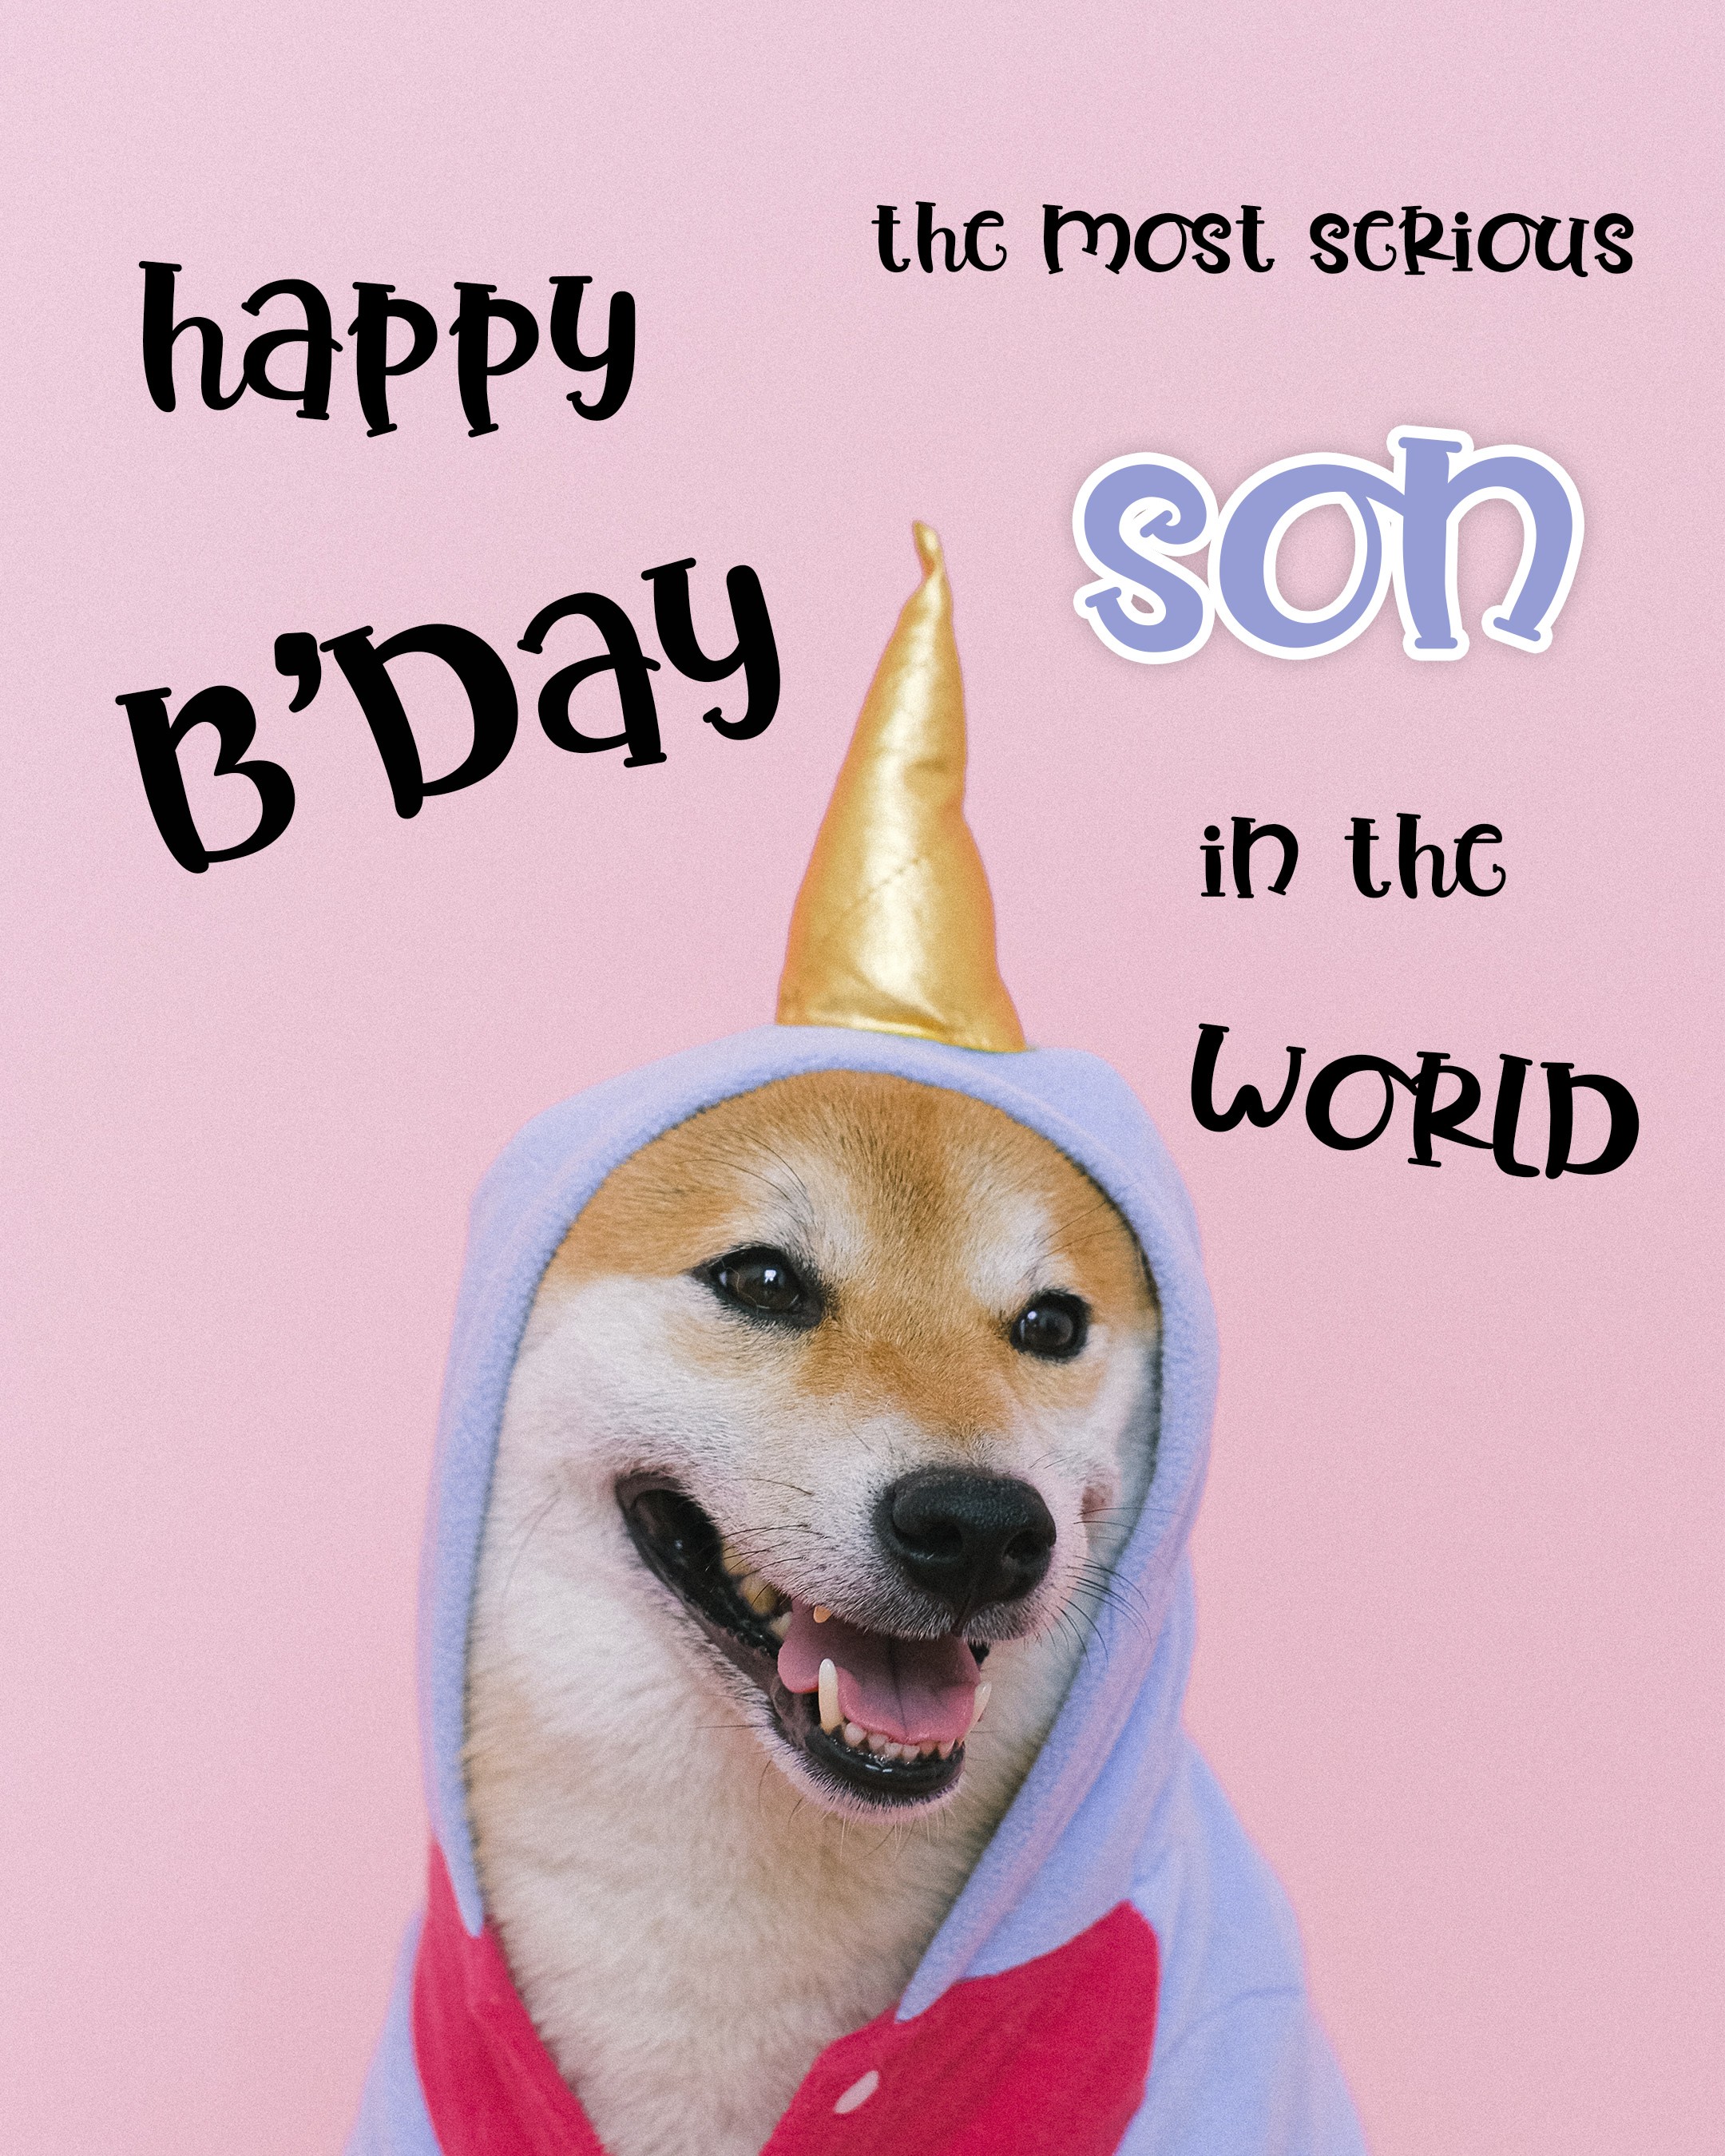 Free Funny Happy Birthday Image For Son With Dog 